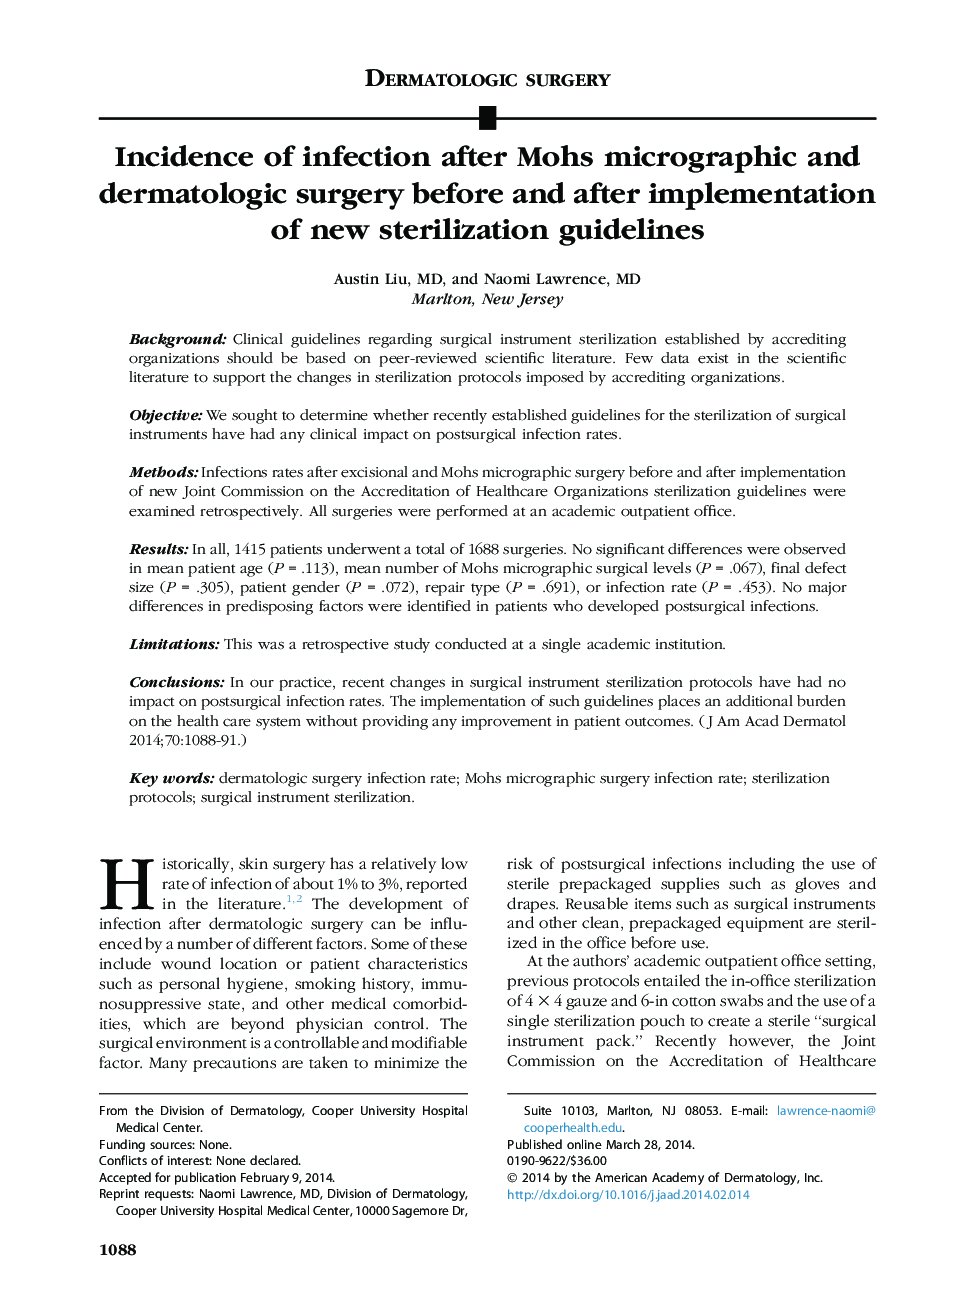 Dermatologic surgeryIncidence of infection after Mohs micrographic and dermatologic surgery before and after implementation of new sterilization guidelines